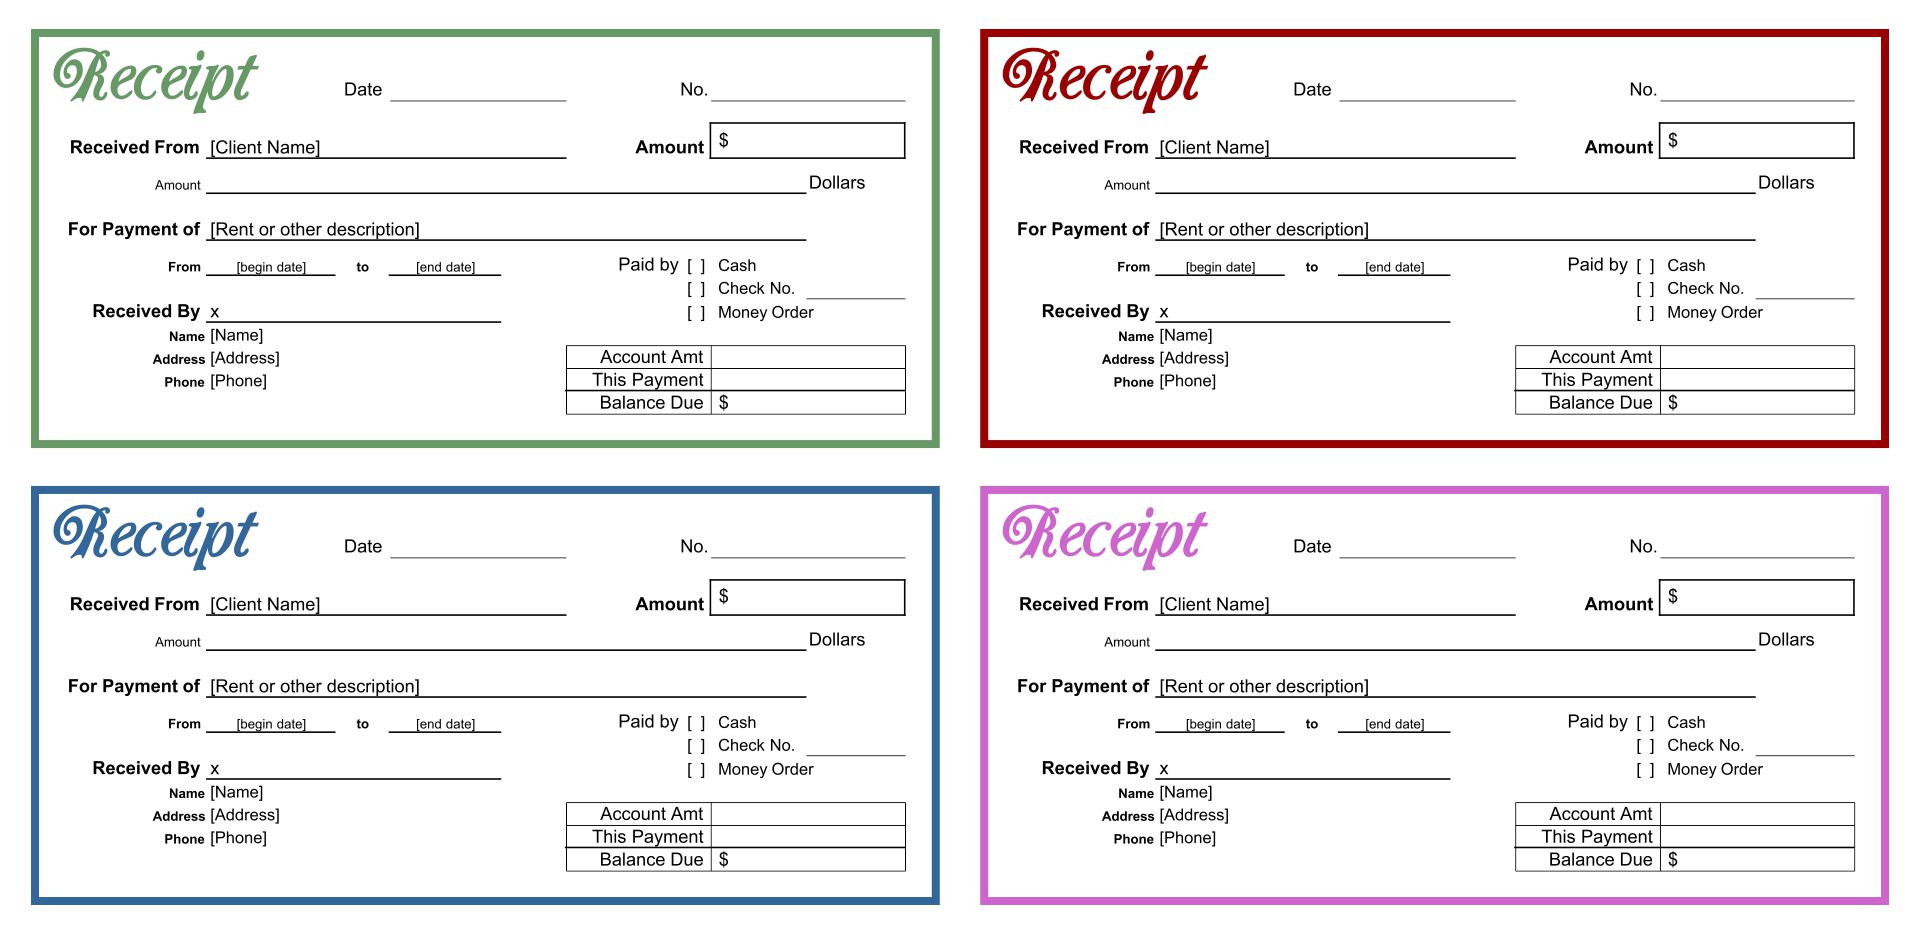 Get Receipt Template Pictures Infortant Document